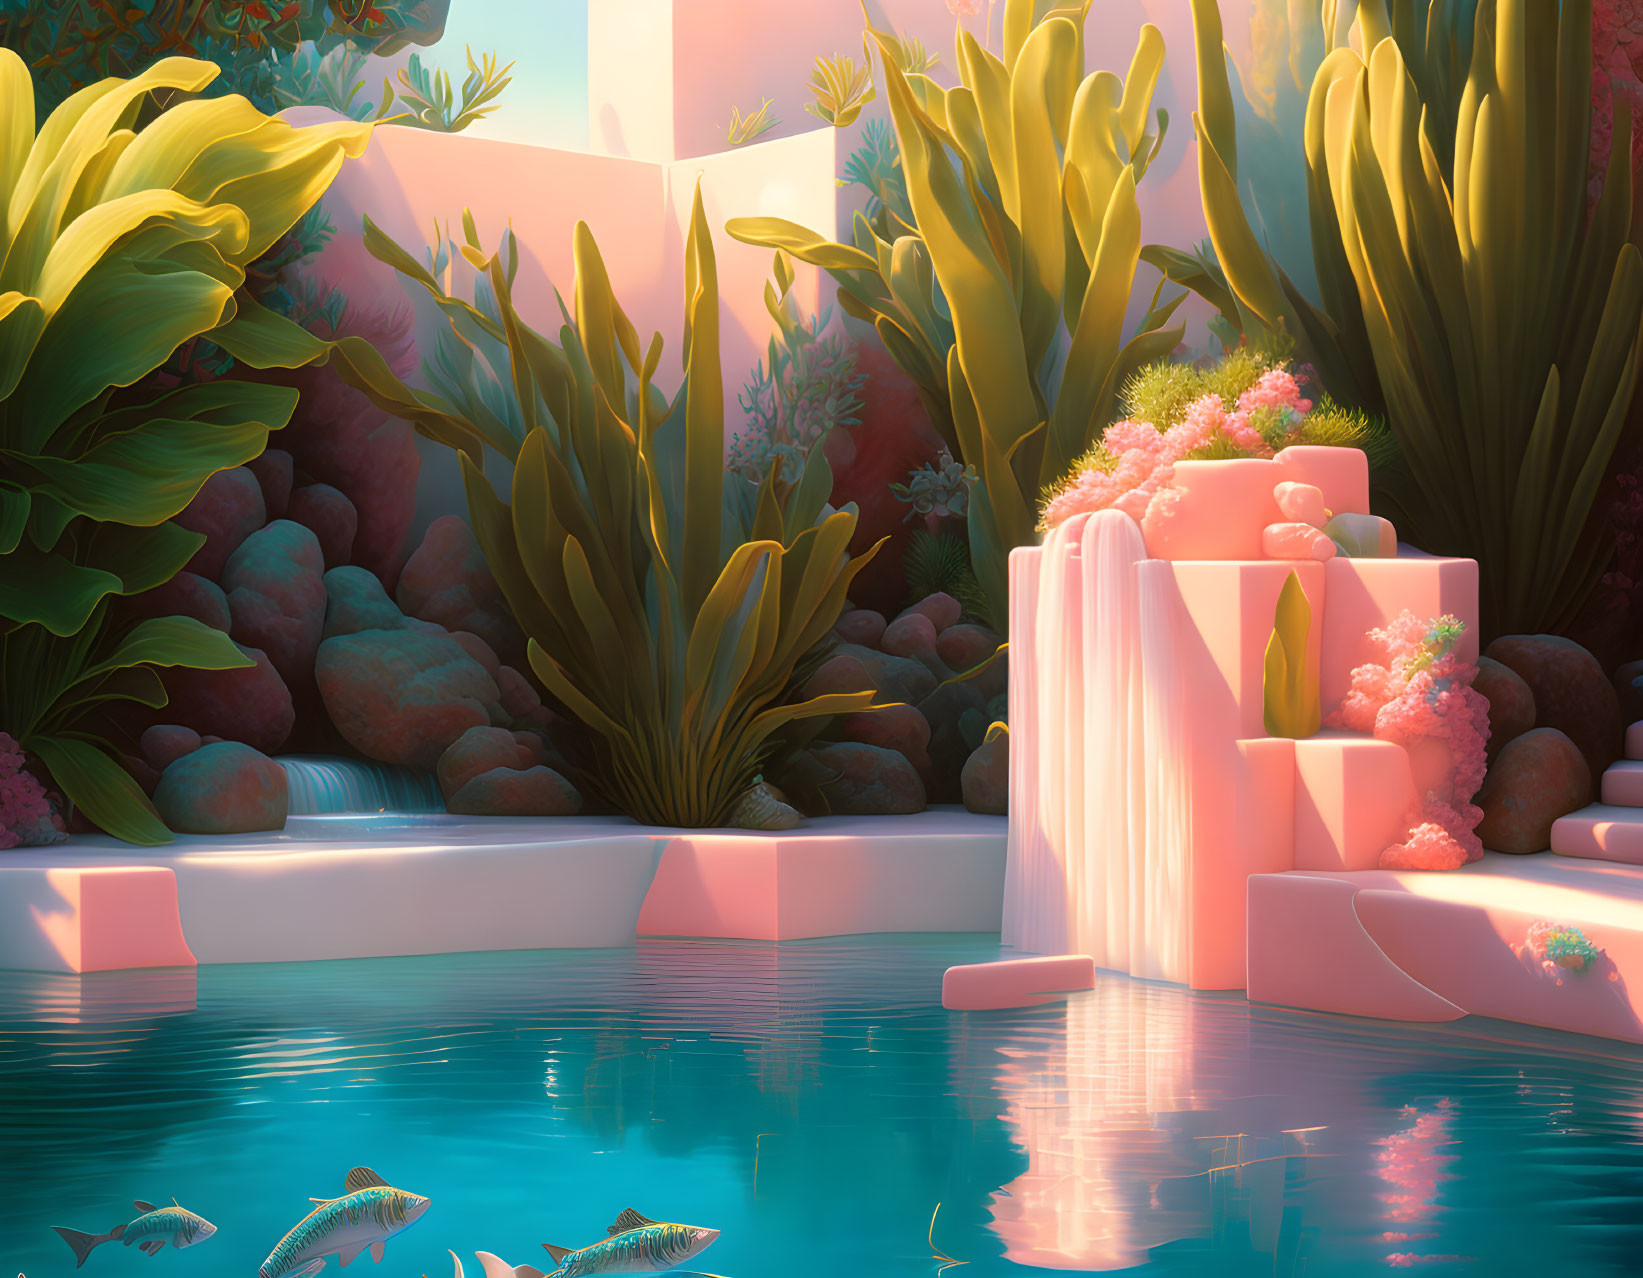 Tranquil surreal landscape with pastel flora, waterfalls, and serene pool